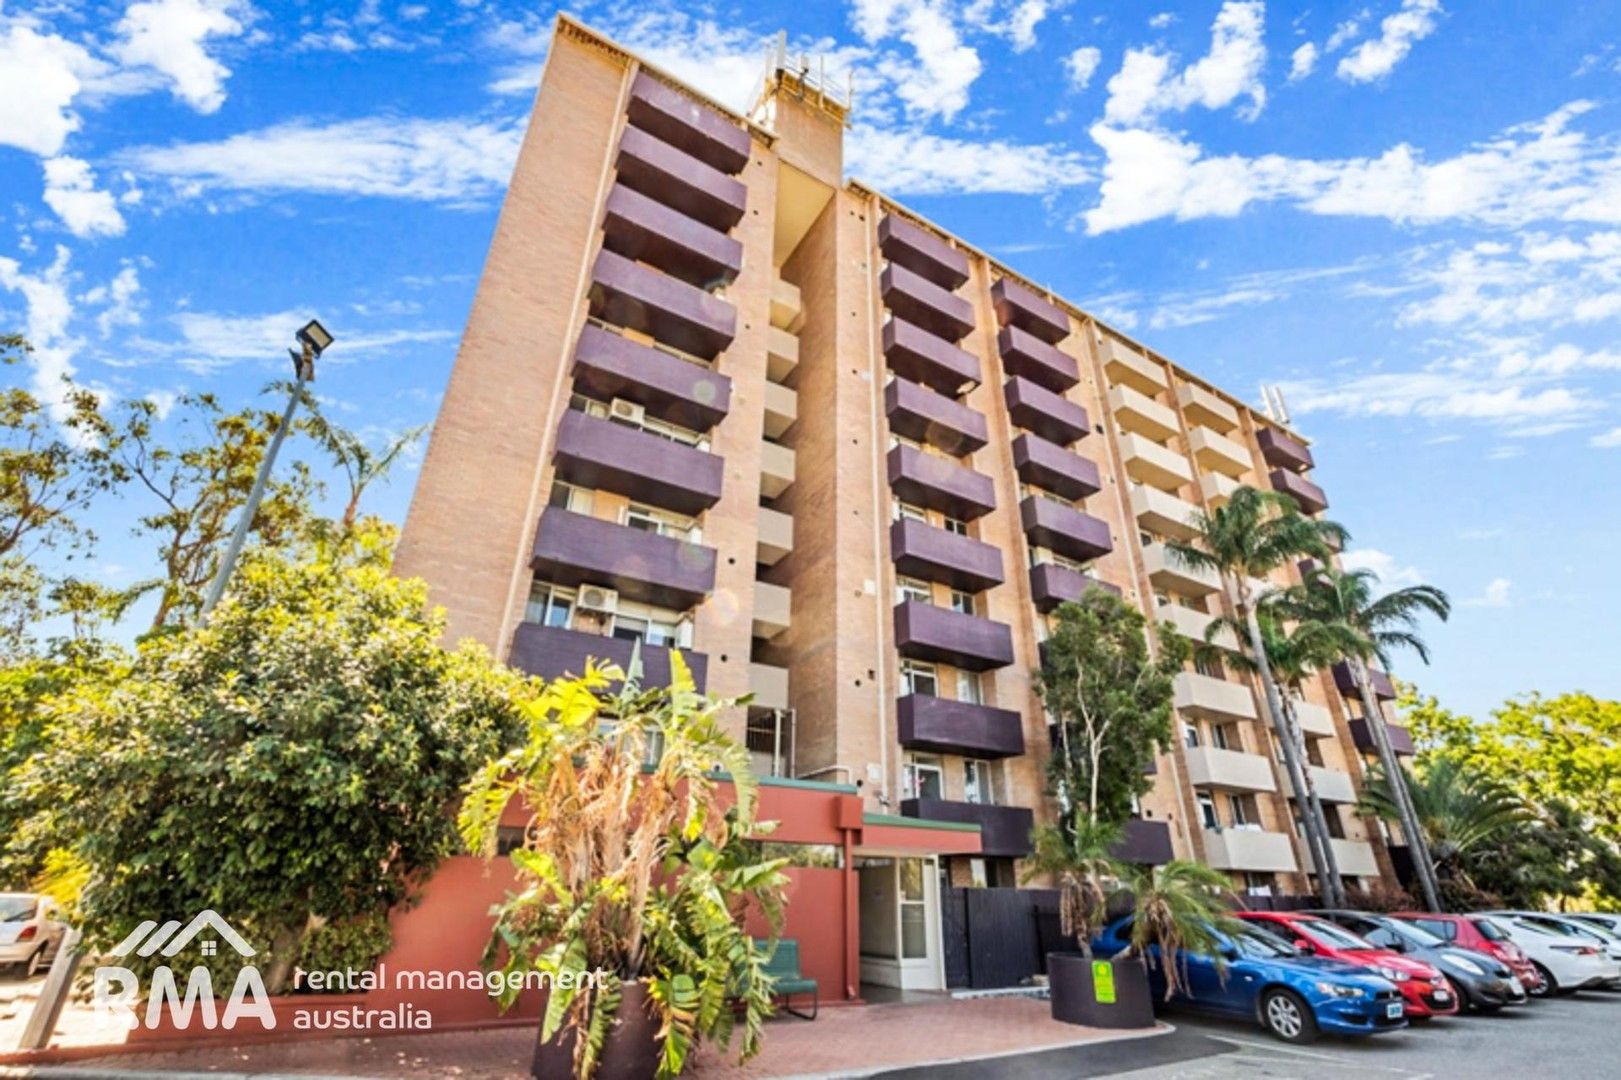 1 bedrooms Apartment / Unit / Flat in 805/36 Tenth Avenue MAYLANDS WA, 6051